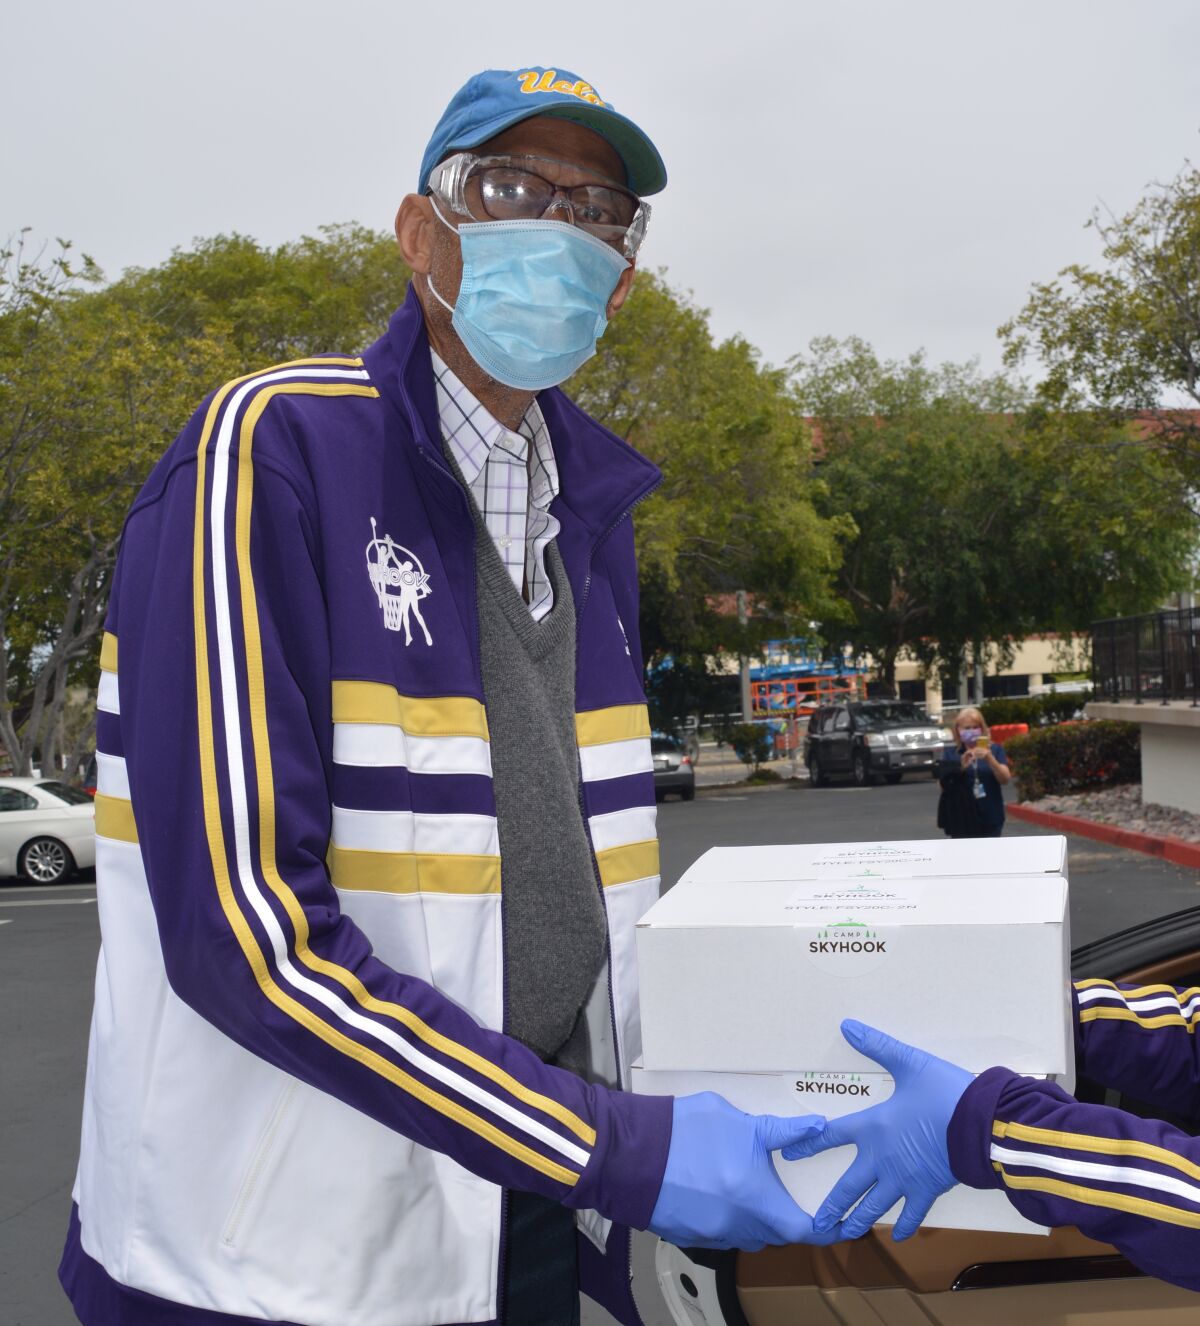 Kareem Abdul-Jabbar donated goggles to Scripps health care workers fighting COVID-19.